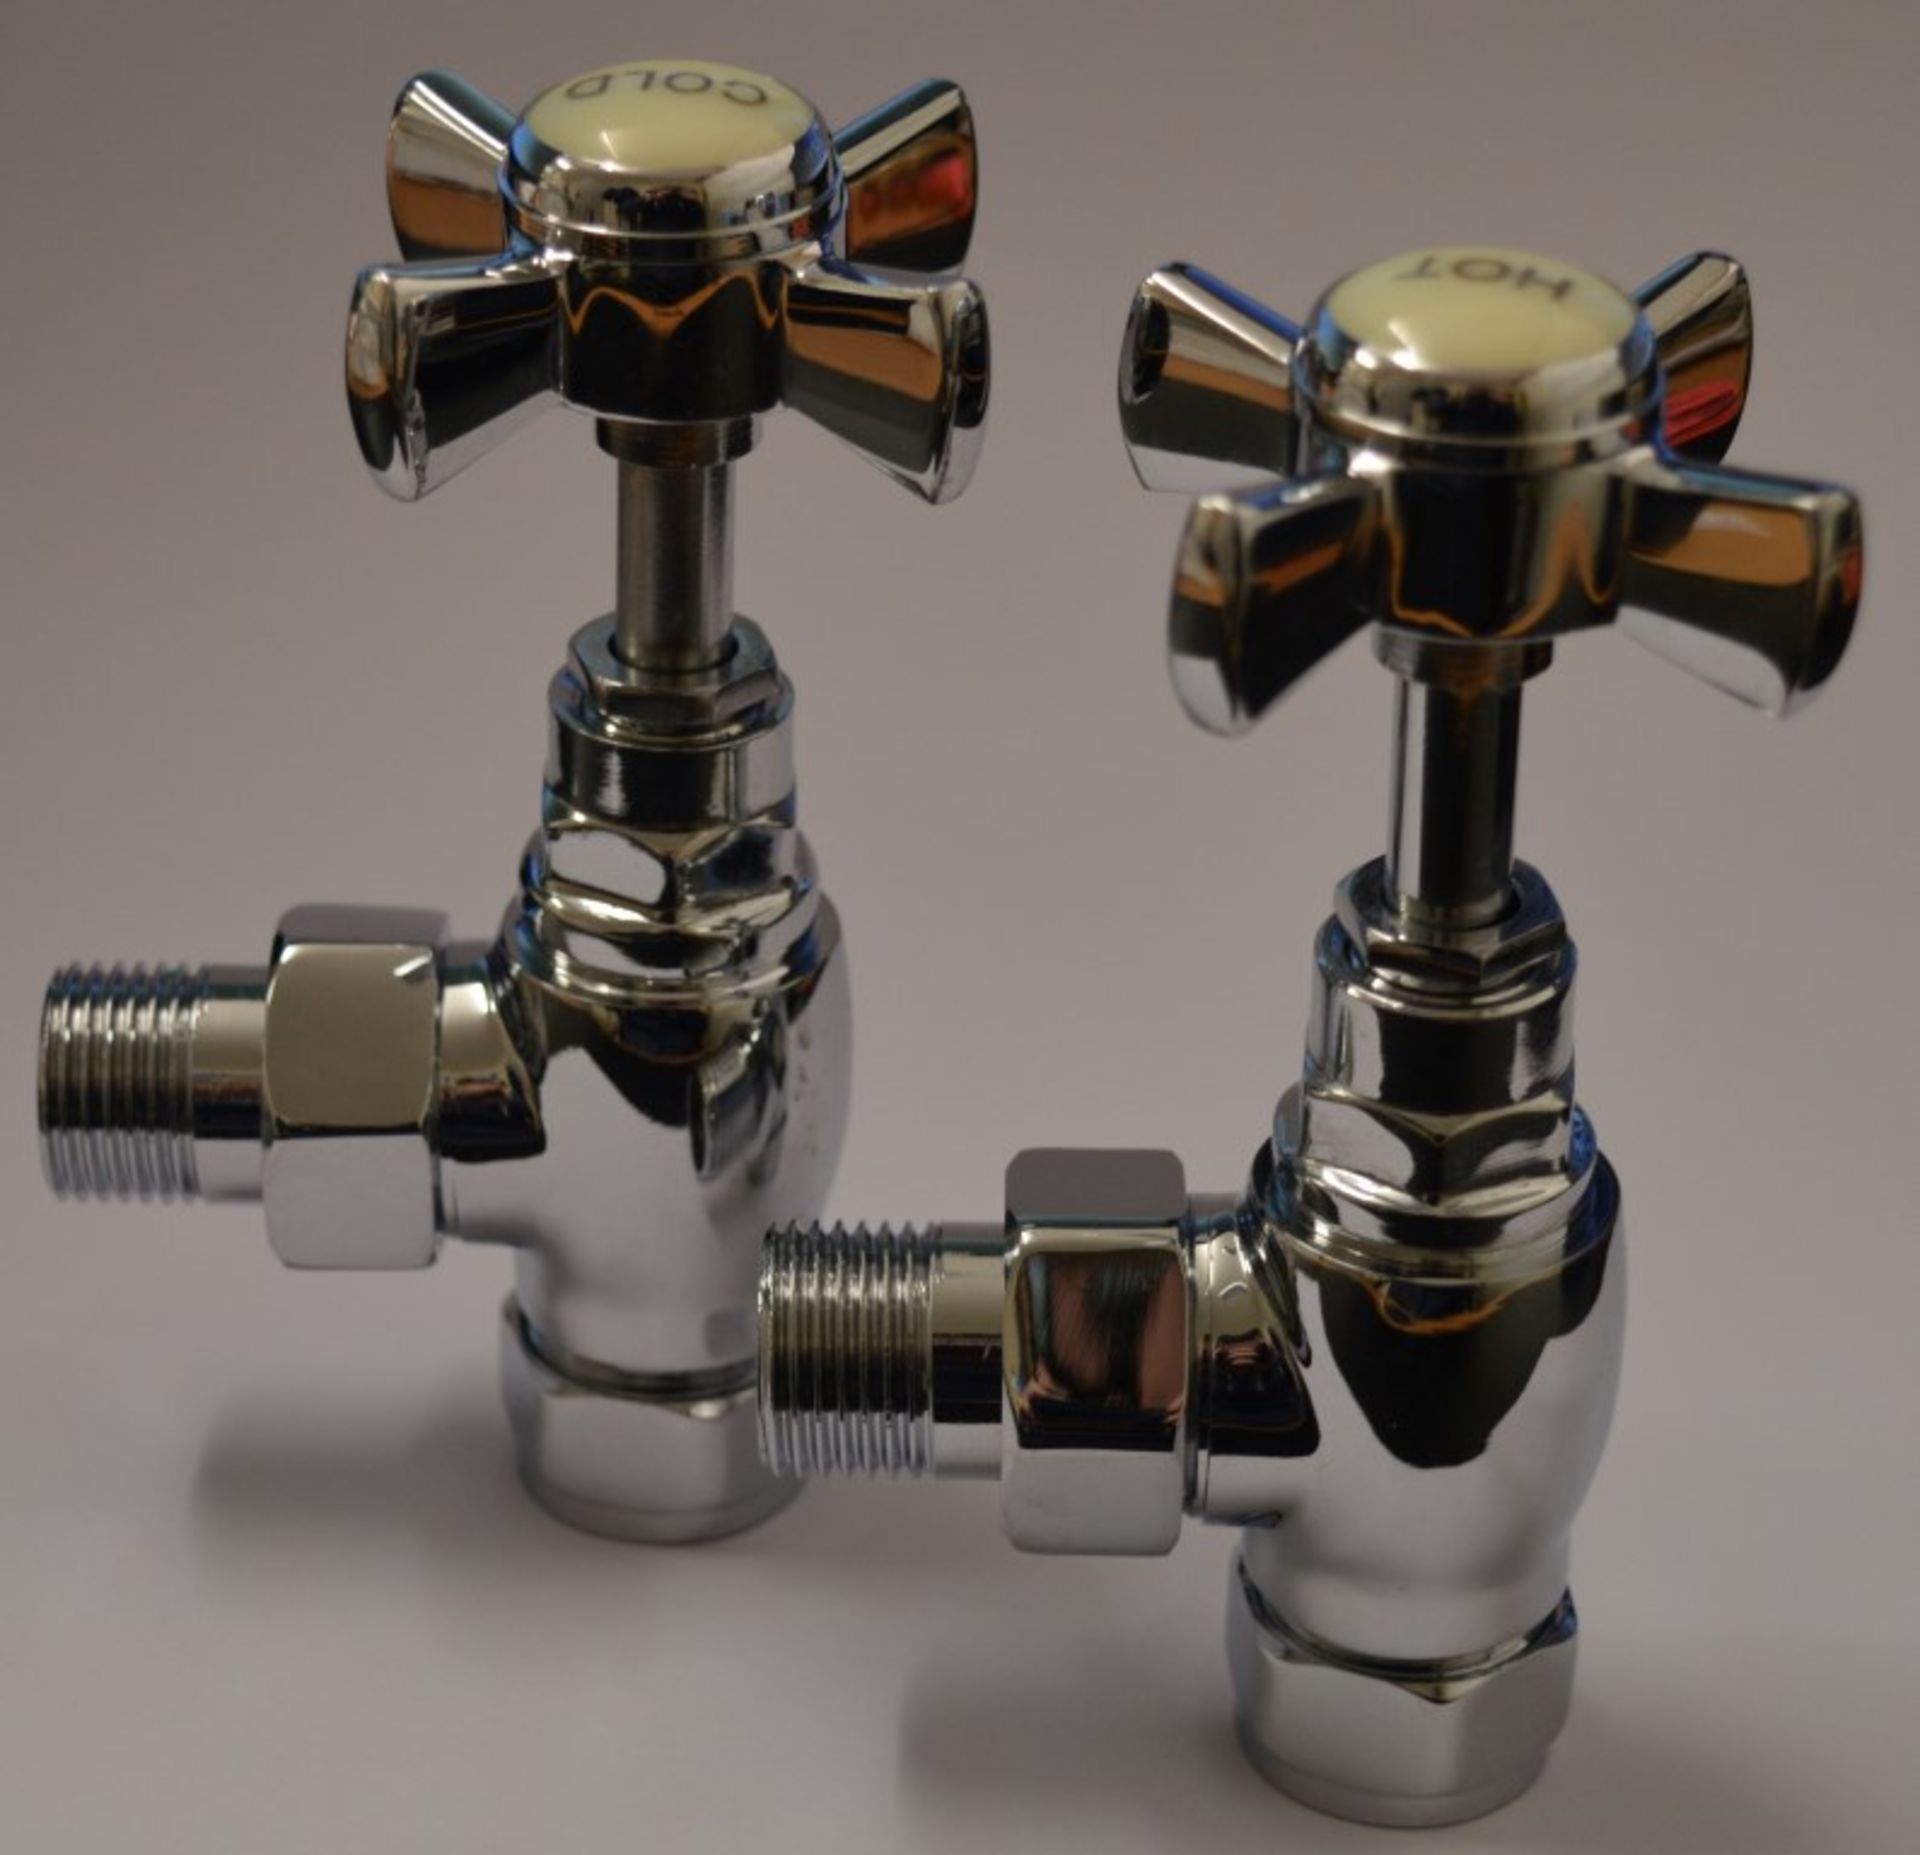 10 x Vogue Bathrooms Pairs of Classical Chrome Radiator Valves - Product Code: VKRADC1 - Brand New - Image 8 of 10